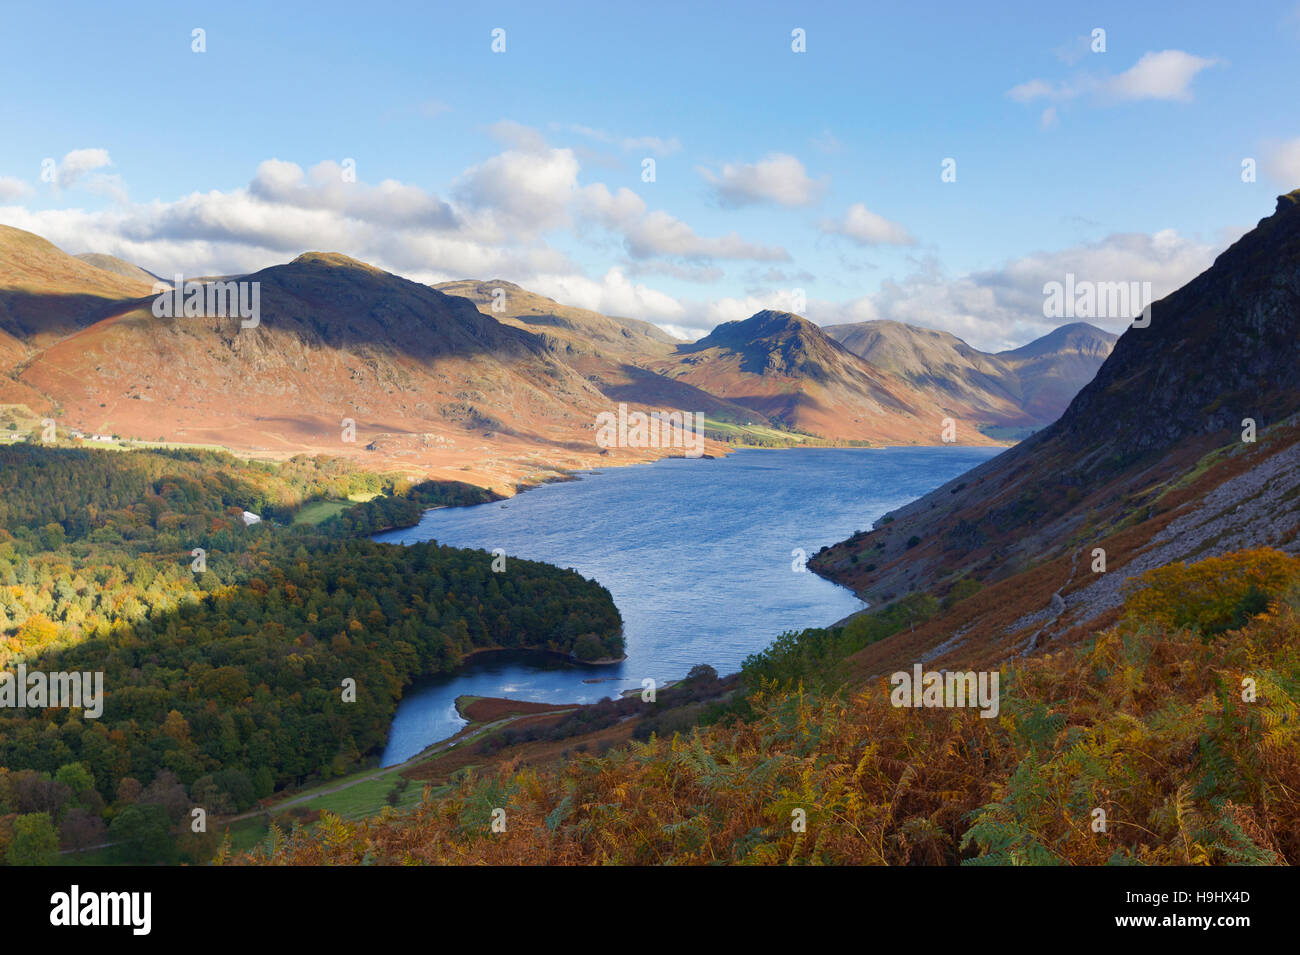 View of Wast Water and surrounding fells from Irton Fell in Wasdale, Cumbria, UK Stock Photo